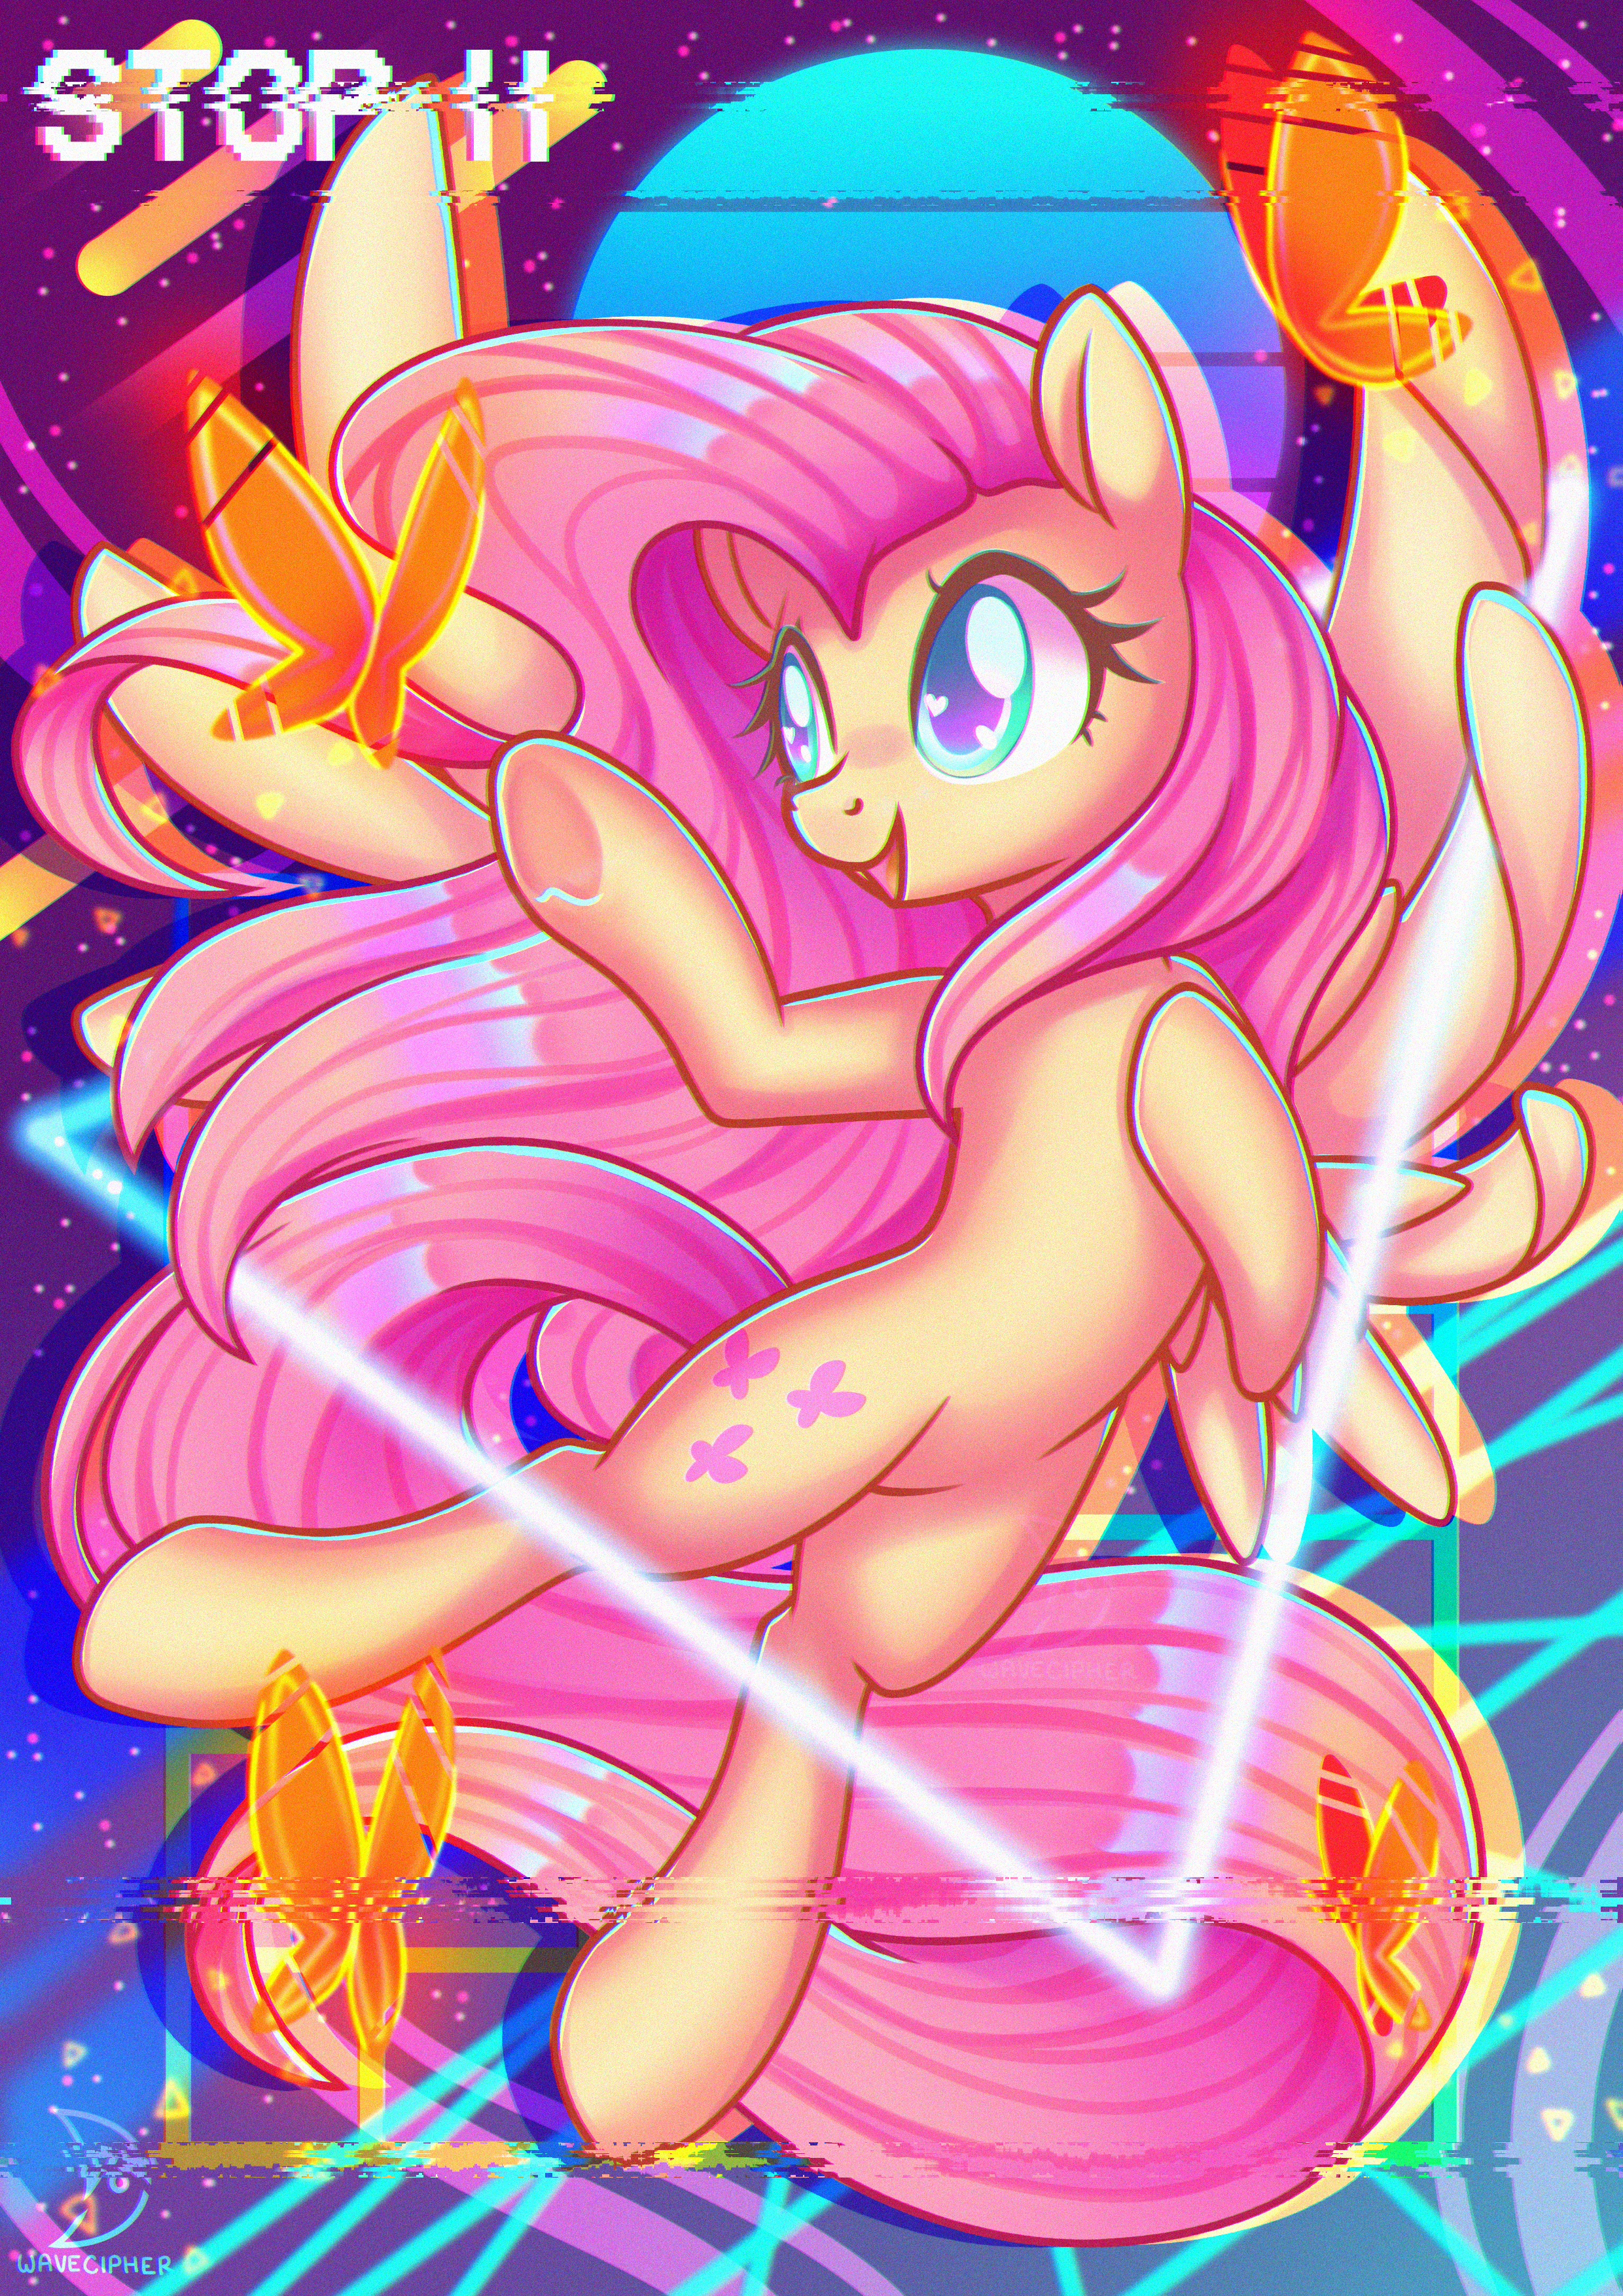 2600680__safe_artist-colon-musicfirewind_fluttershy_butterfly_pegasus_pony_abstract+background_chromatic+aberration_cute_distortion_featured+image_female_flowin.jpg